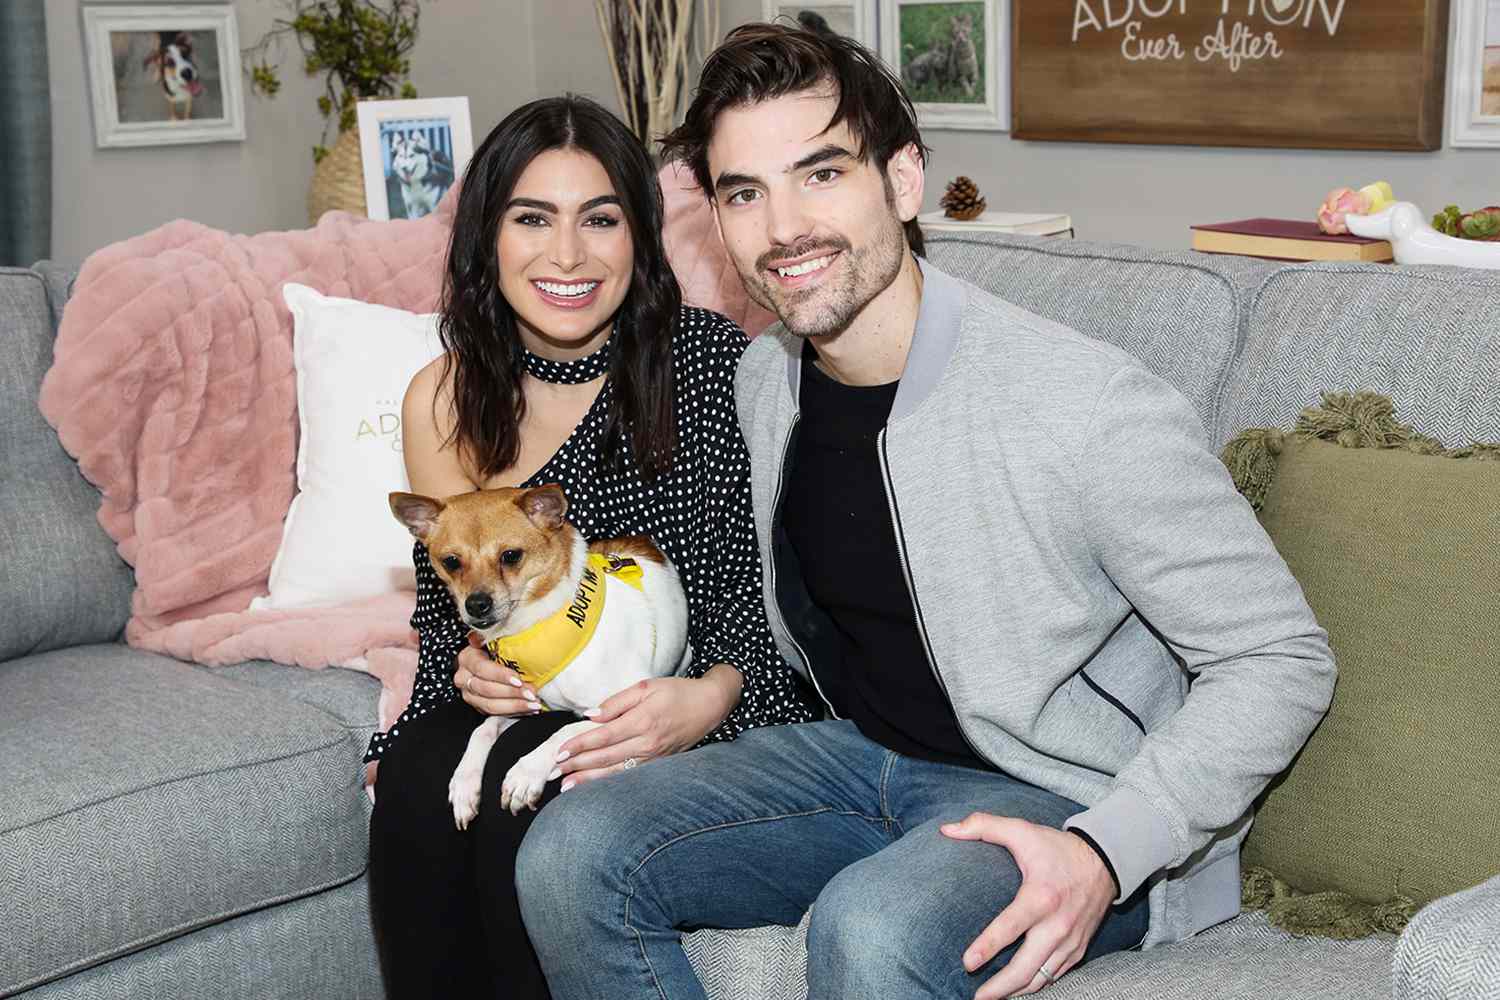 Ashley Iaconetti Haibon (L) and Jared Haibon pose with a rescue dog on the set of Hallmark Channel's "Home & Family" at Universal Studios Hollywood on February 20, 2020 in Universal City, California